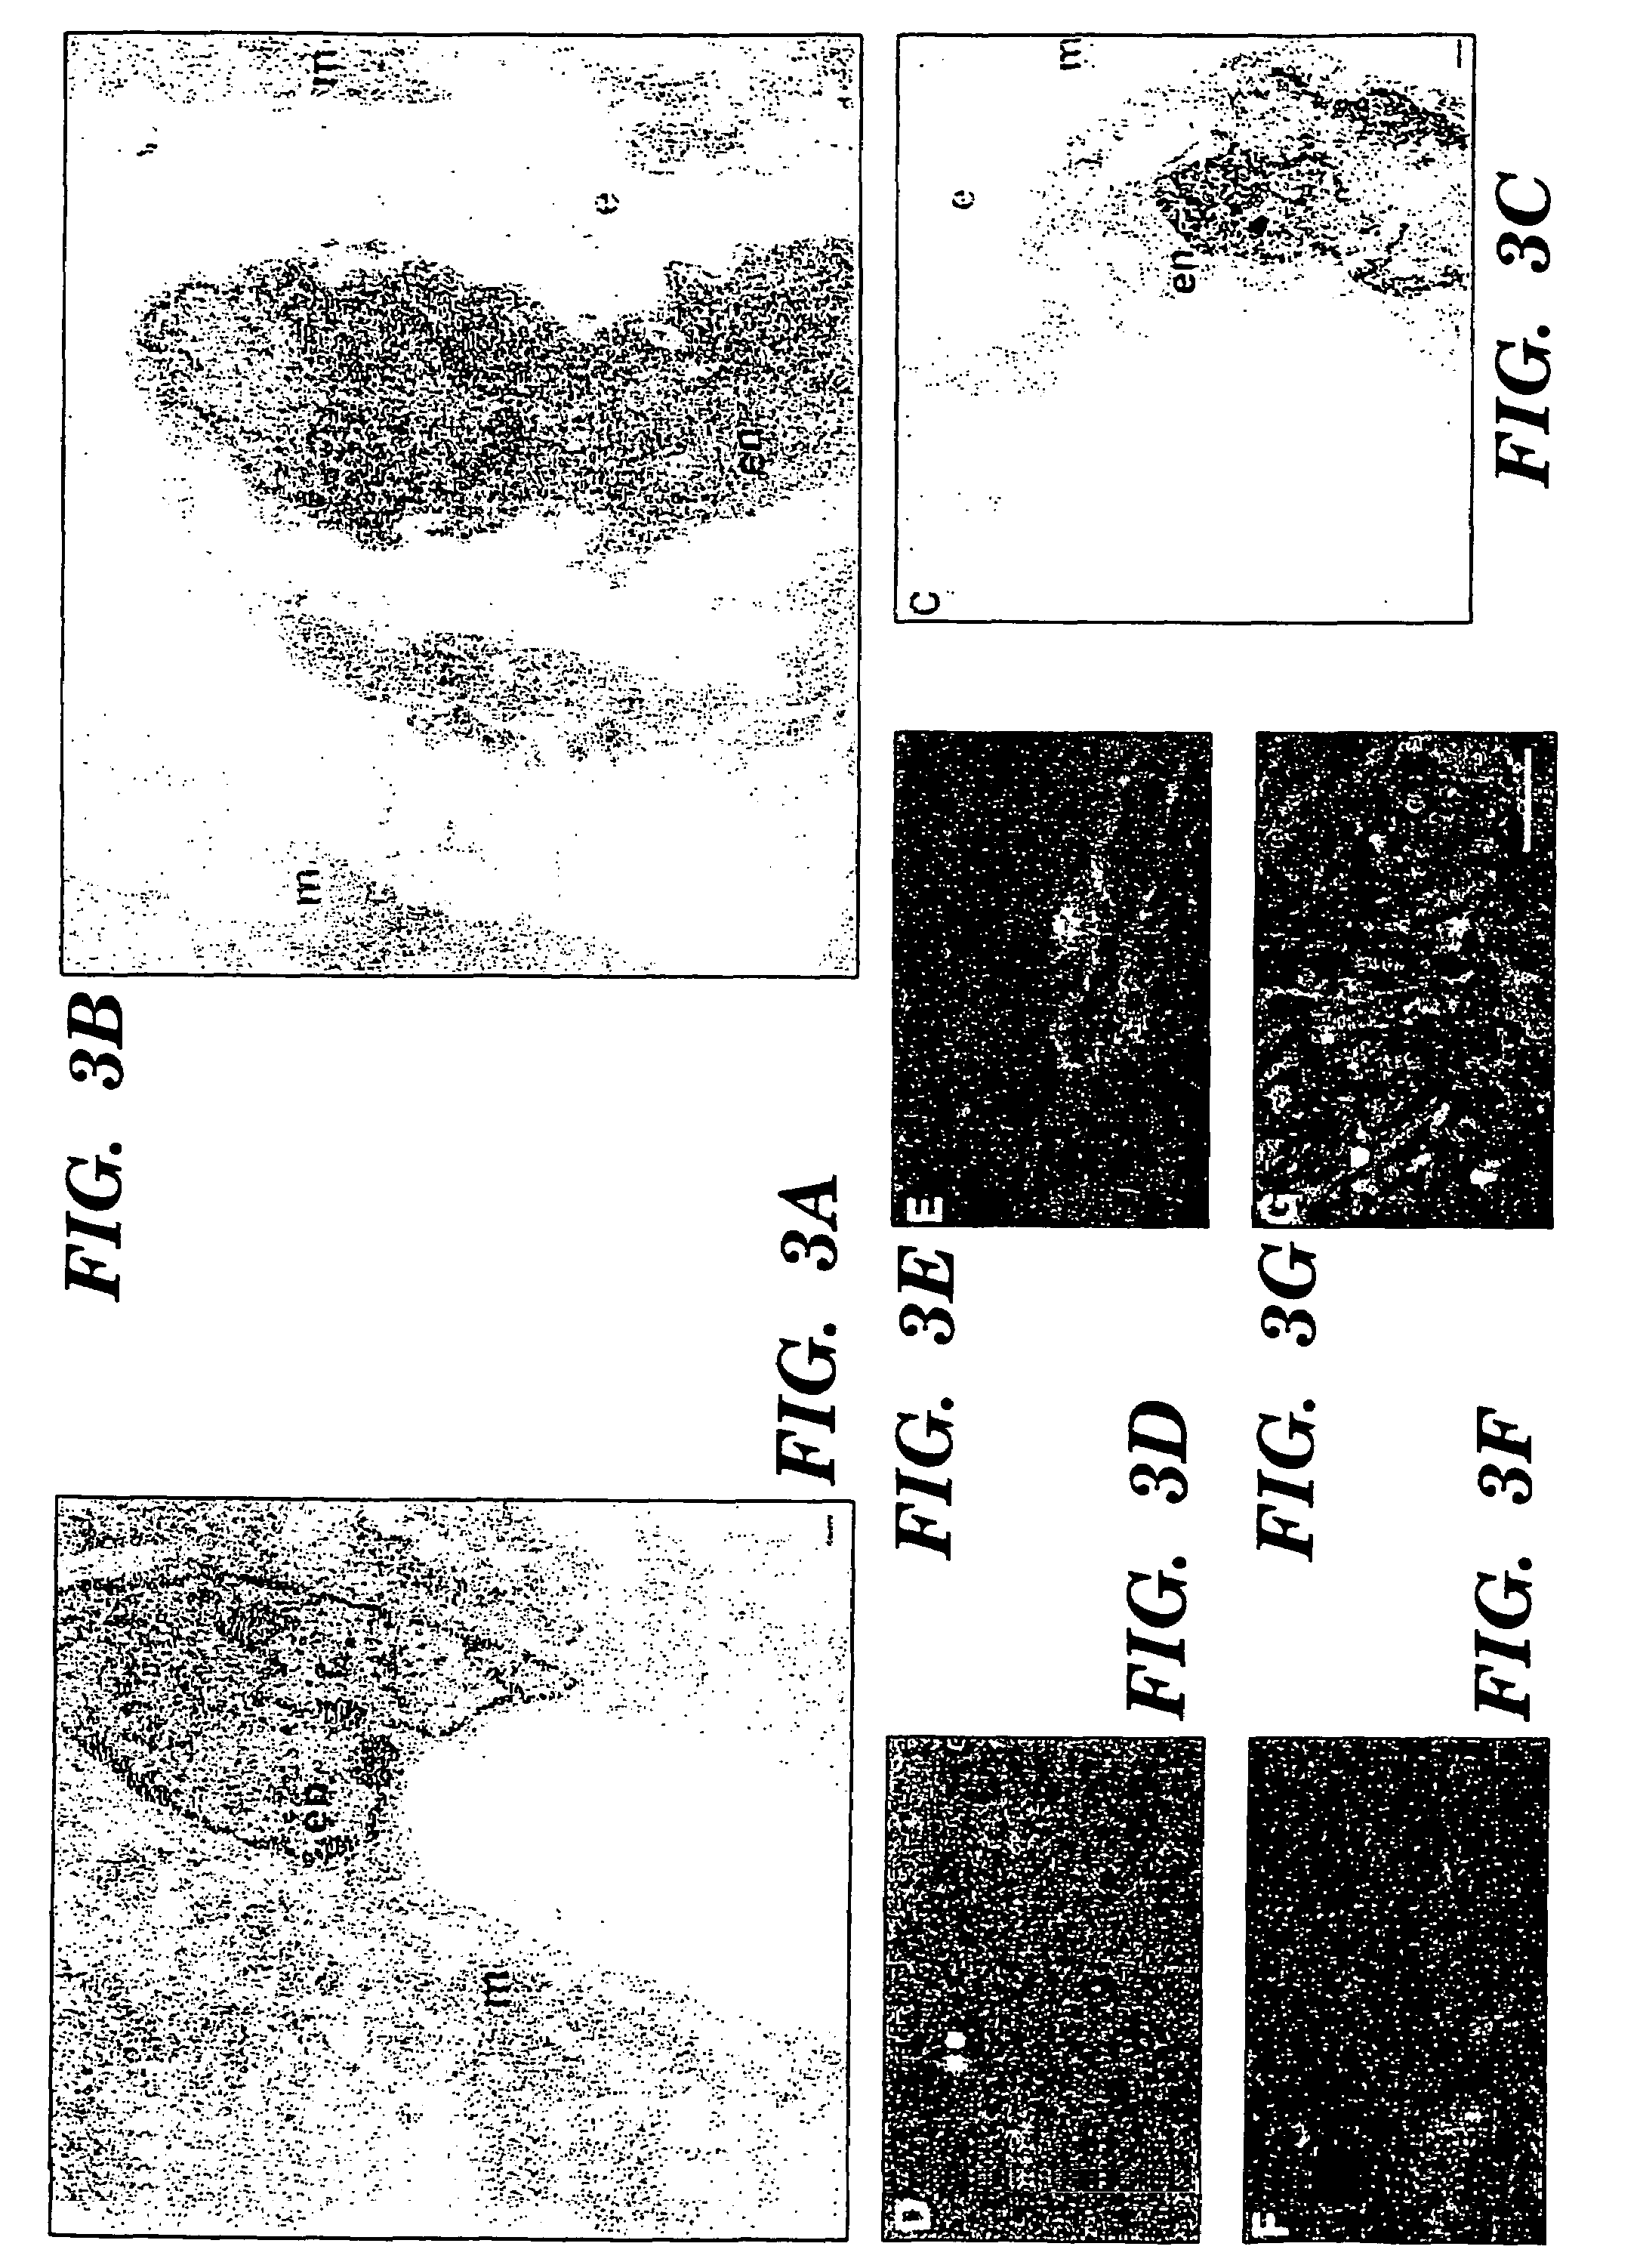 Methods for increasing capillary density and maintaining viability of microvascular cardiac endothelial cells using trk receptor ligands